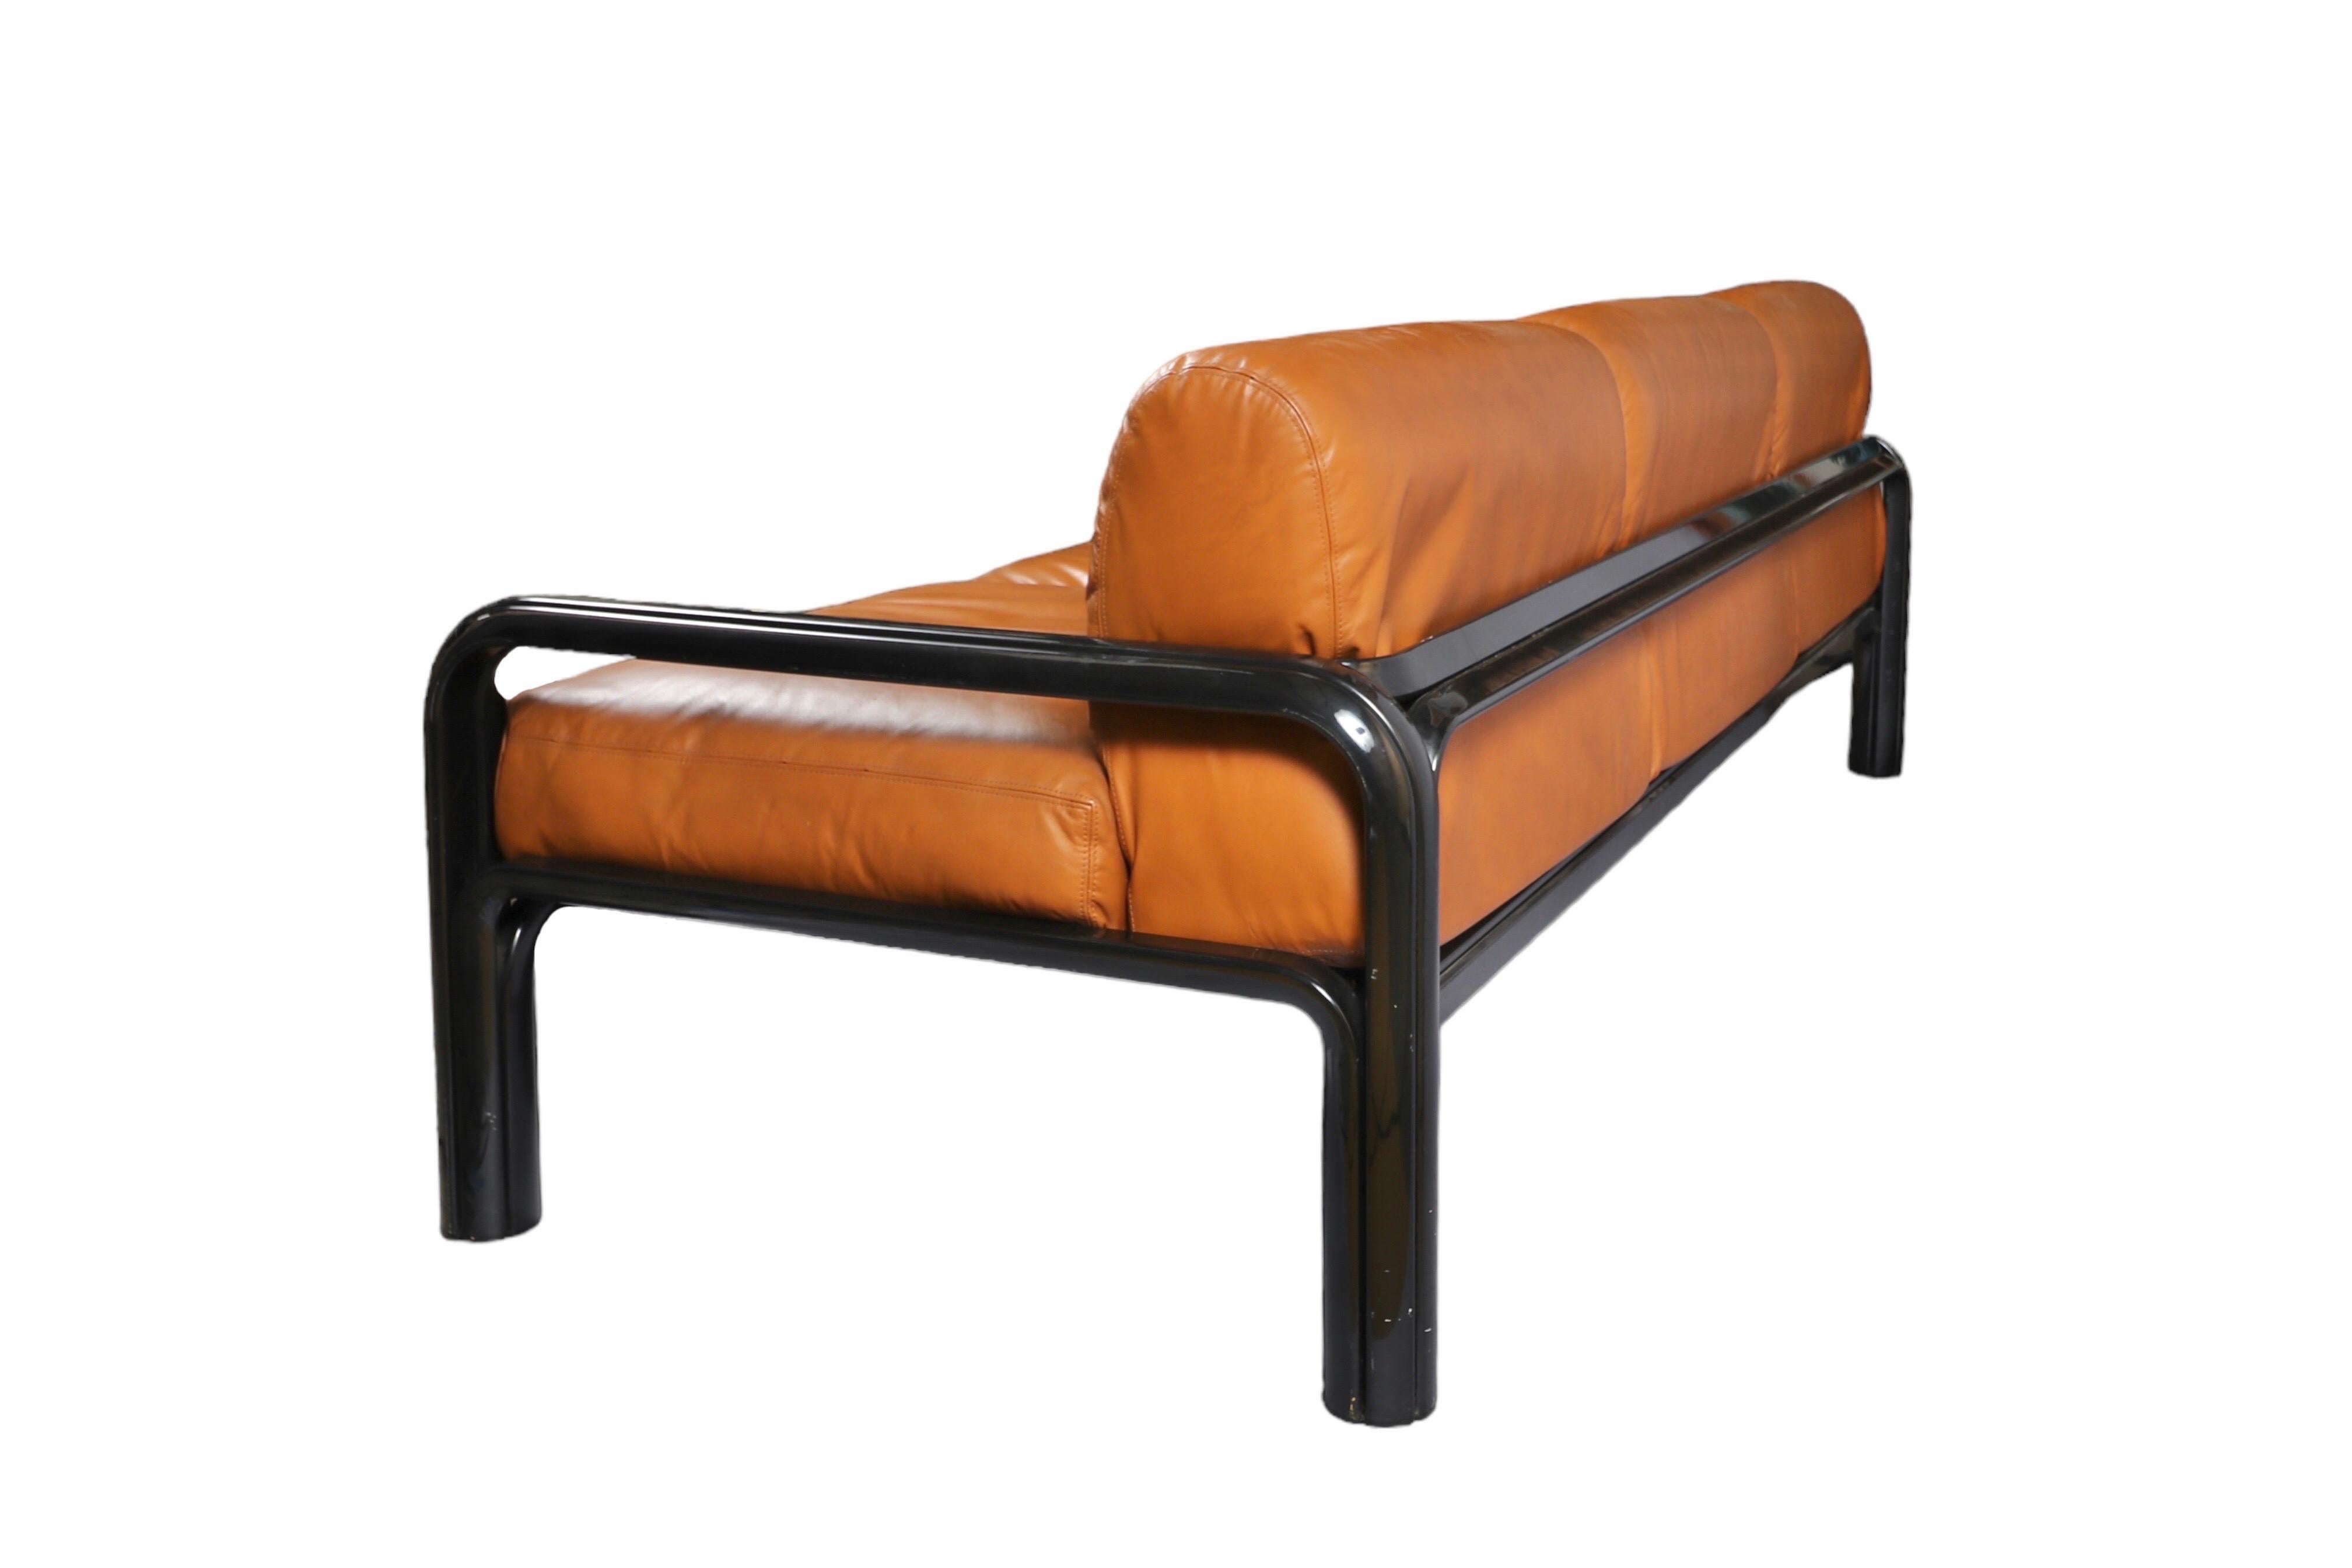 Three seat sofa by Gae Aulenti (b. Palazzolo Dello Stella 1927 - Milano 2012).

Produced by Knoll International, USA, circa 1970.

Features removable Cognac faux leather seat and back cushions, black lacquered metal frame.

Arm height, 21.5” H;